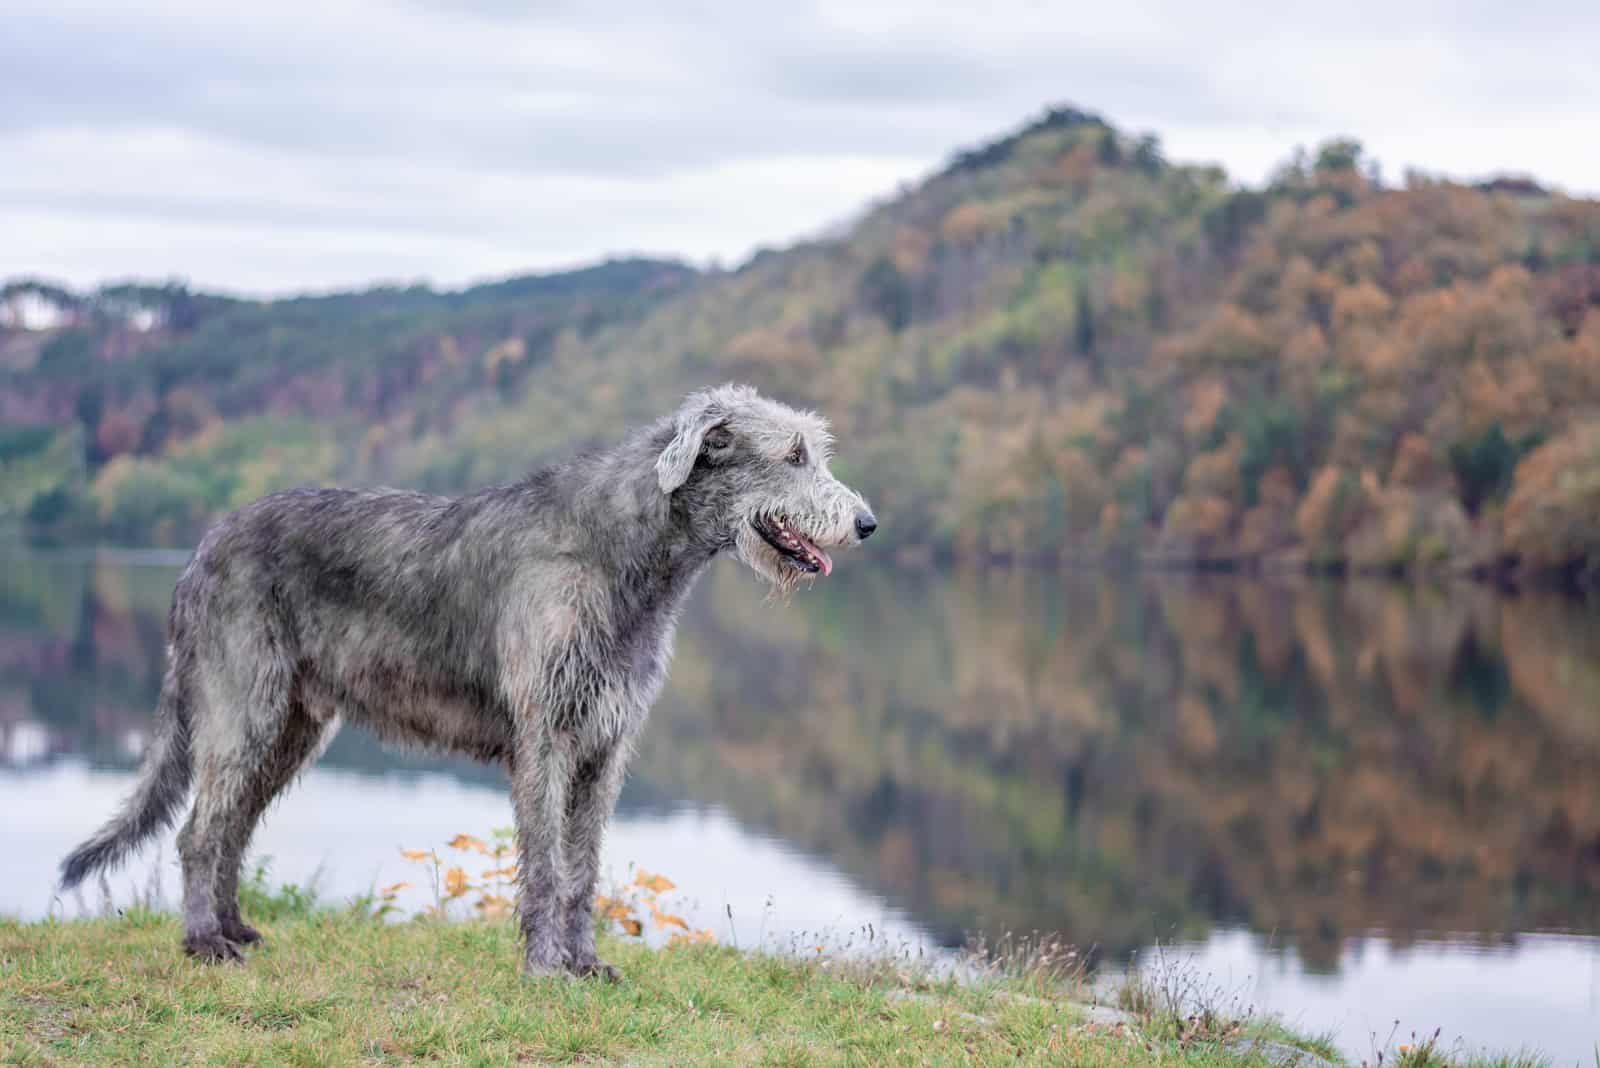 A huge Irish wolfhound stands on the river bank